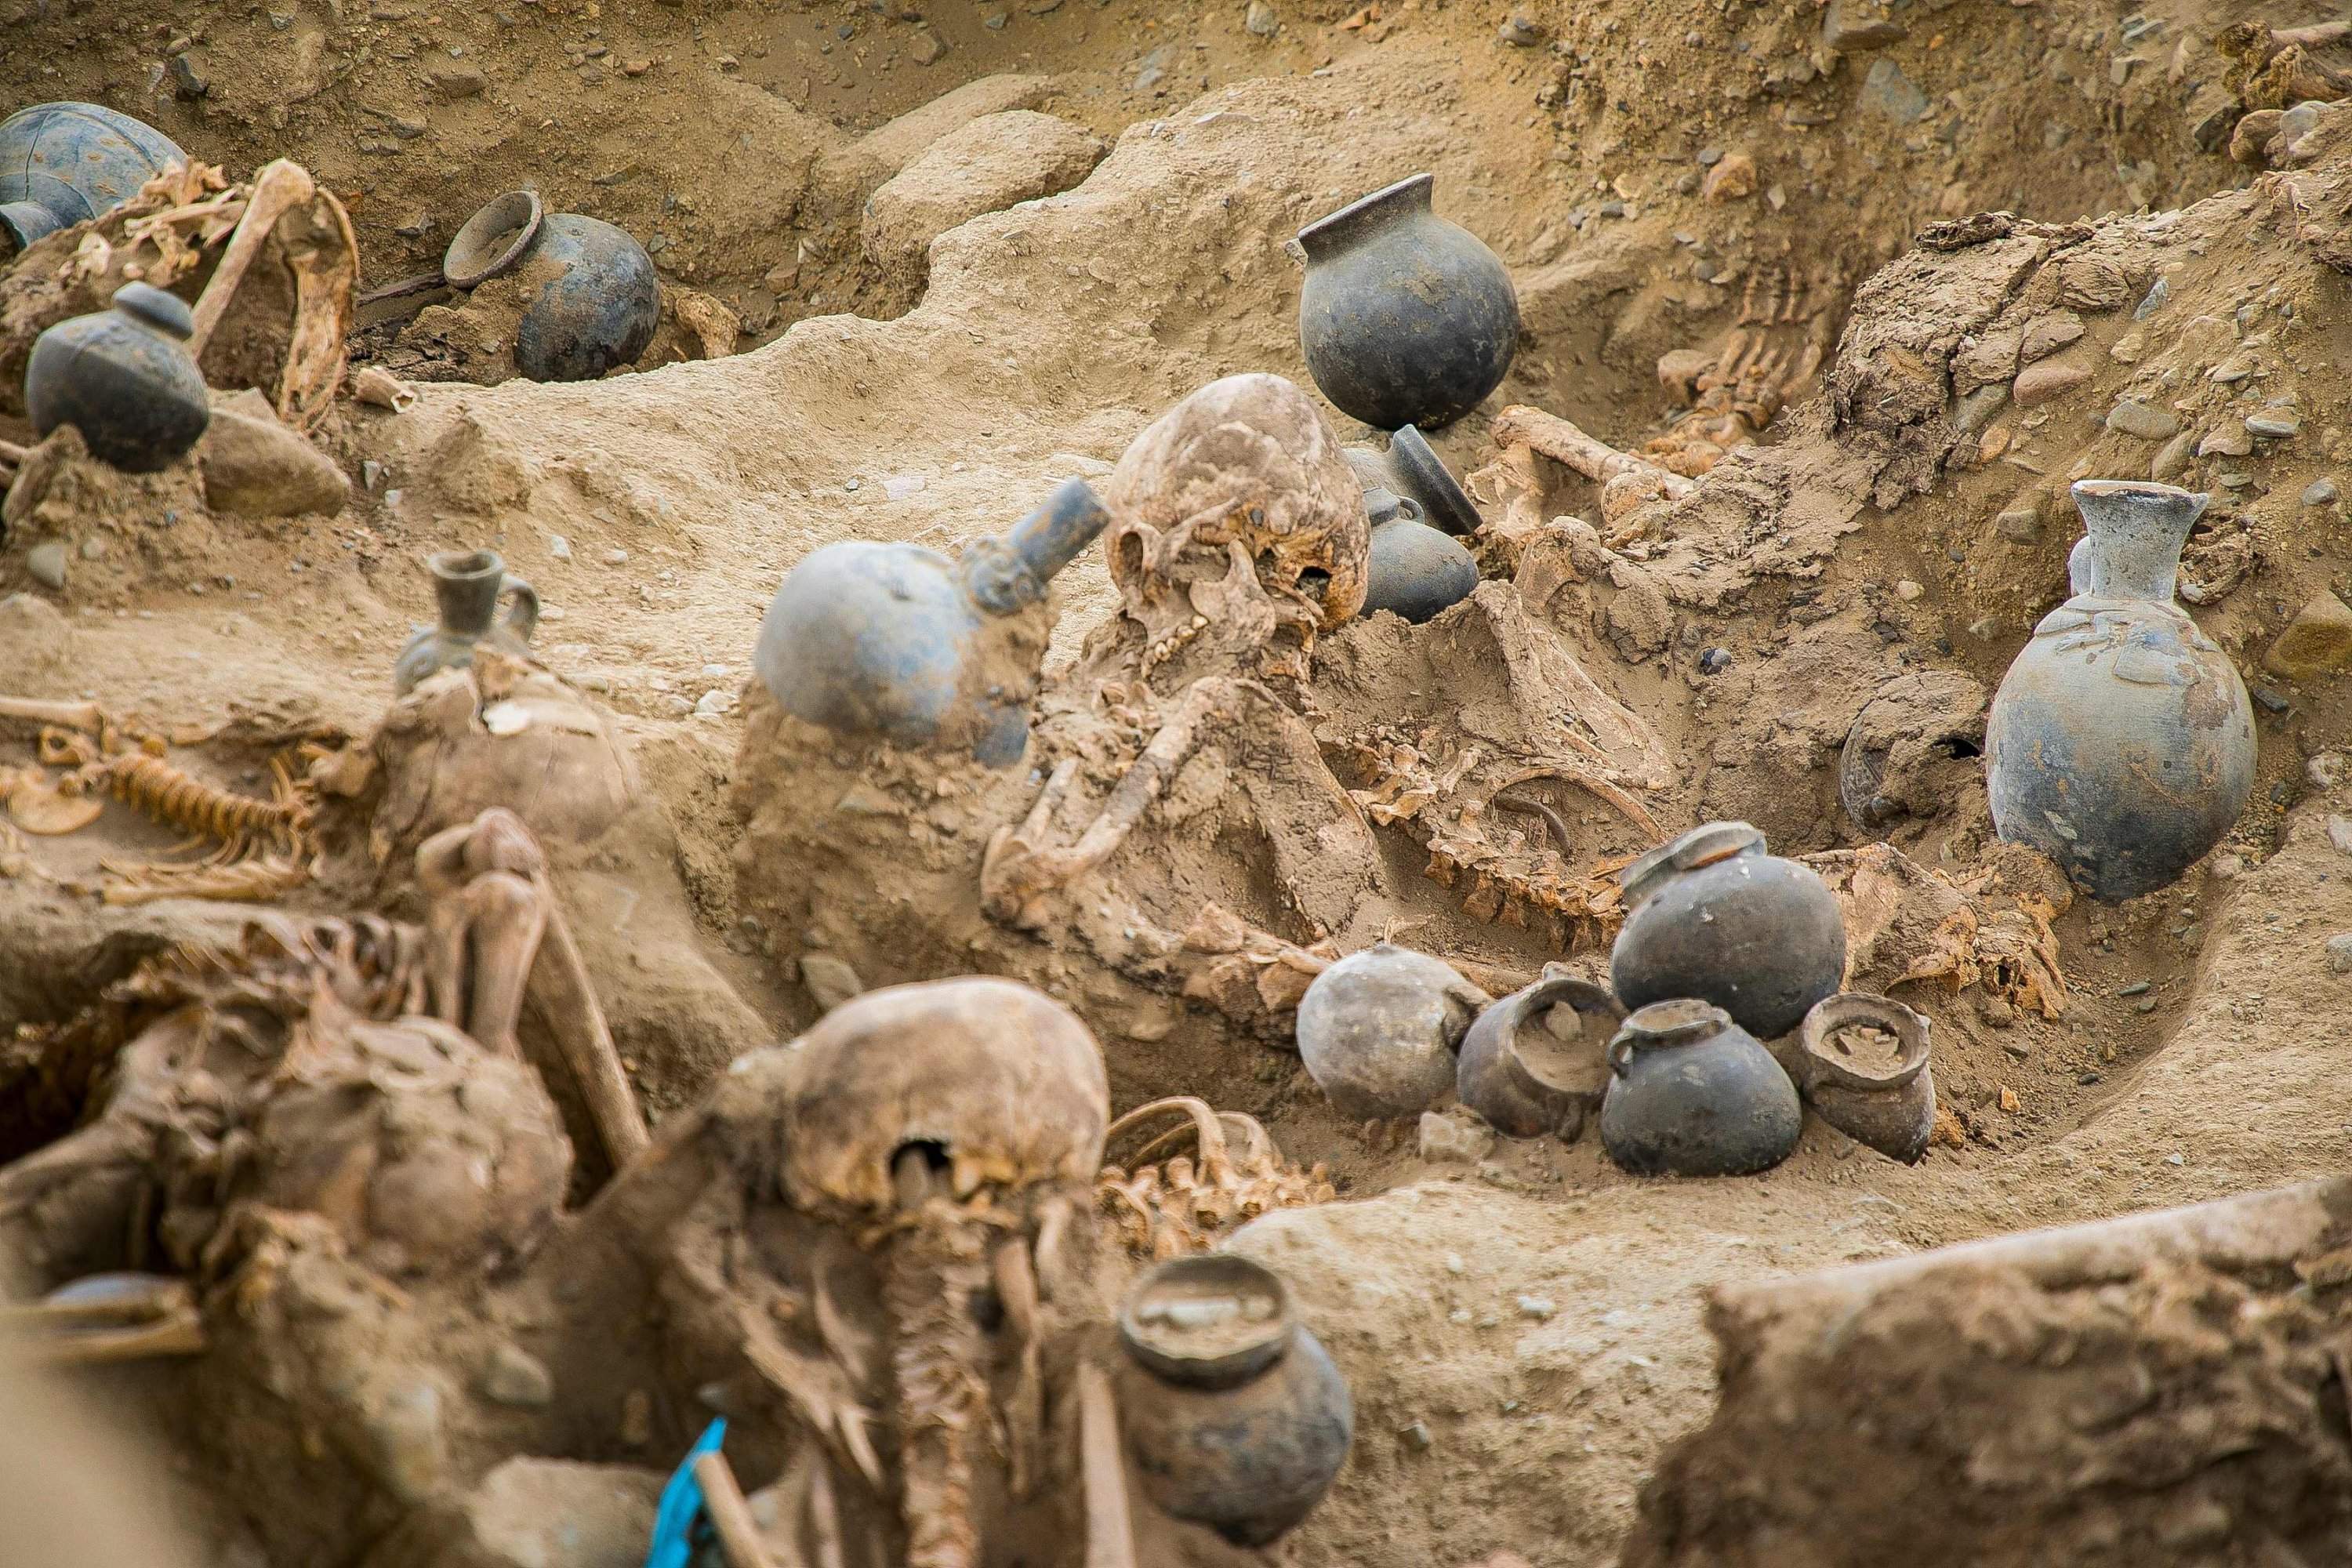 Handout picture released by Peruvian Ministry of Culture showing the human remains discovered at the archaeological complex of Chan Chan, in Trujillo, Peru, Nov. 11, 2021. (AFP)